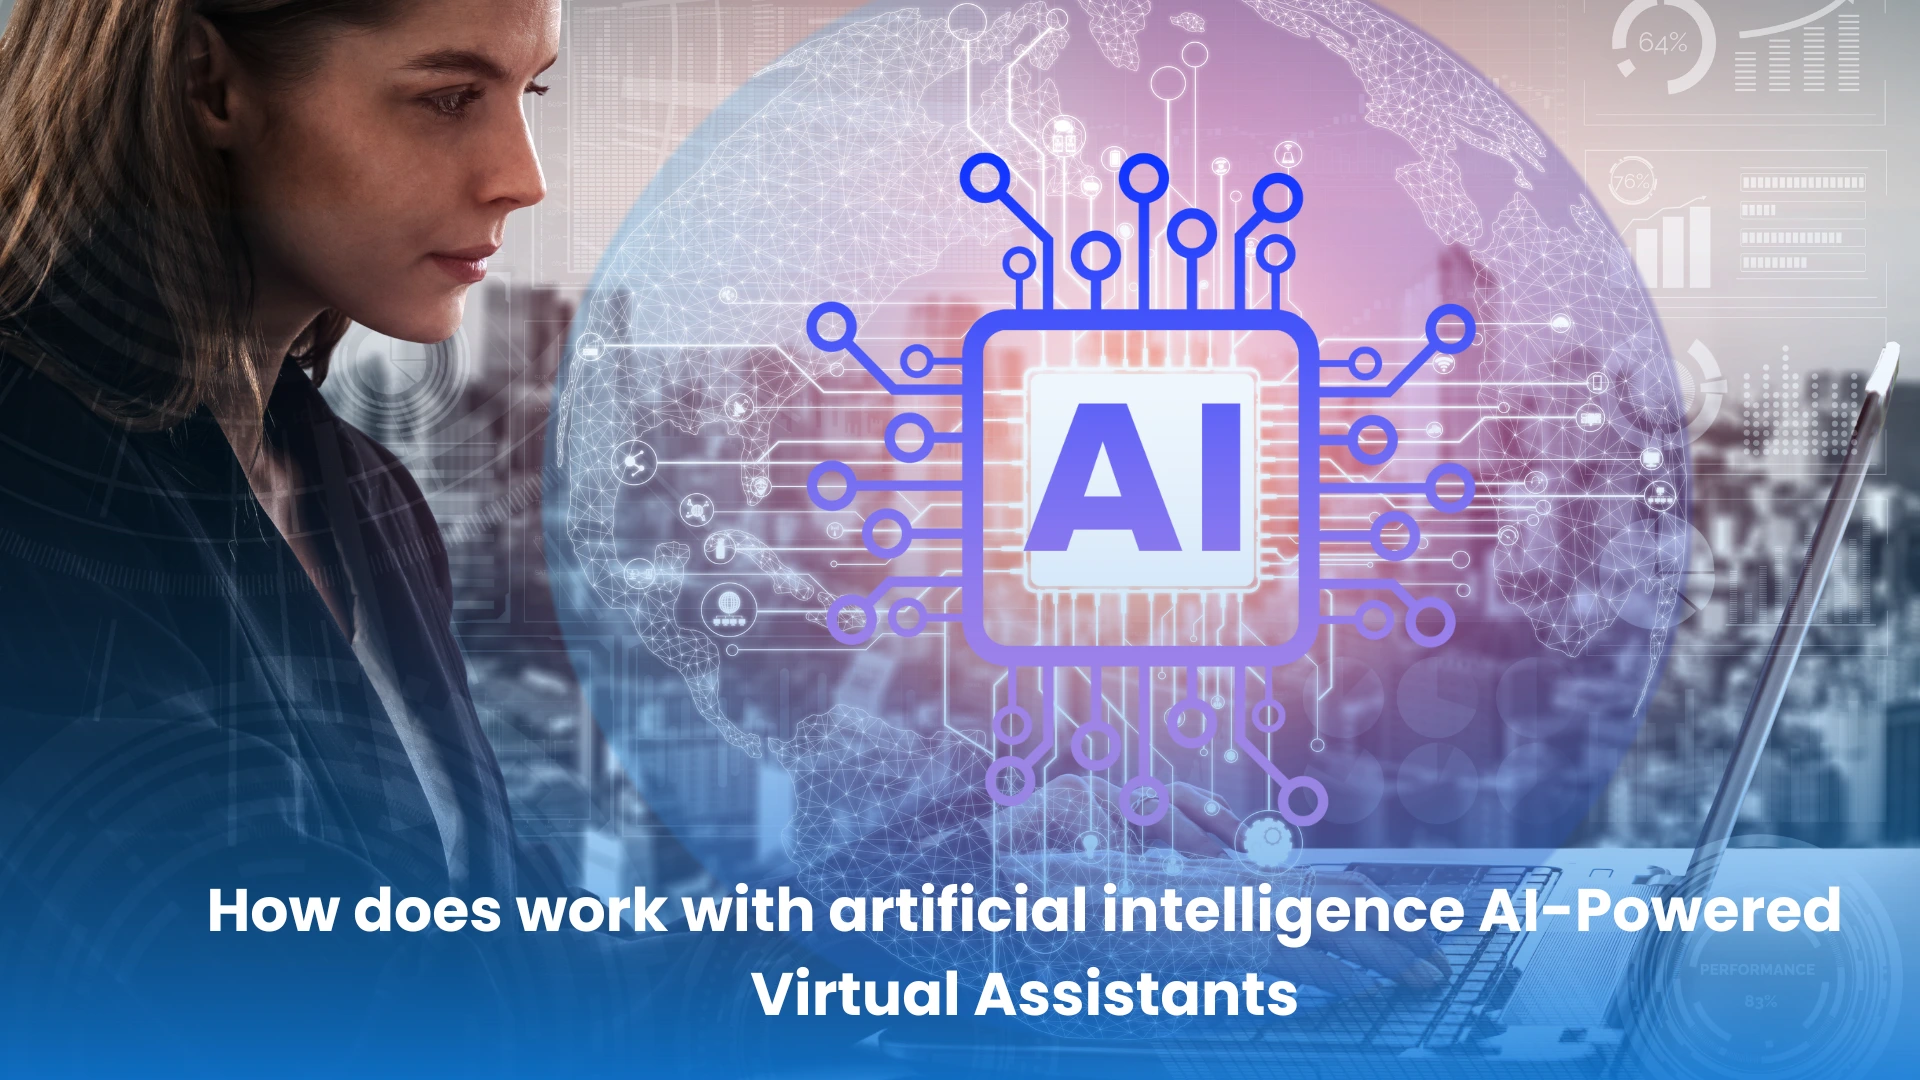 How does work with artificial intelligence AI-Powered Virtual Assistants